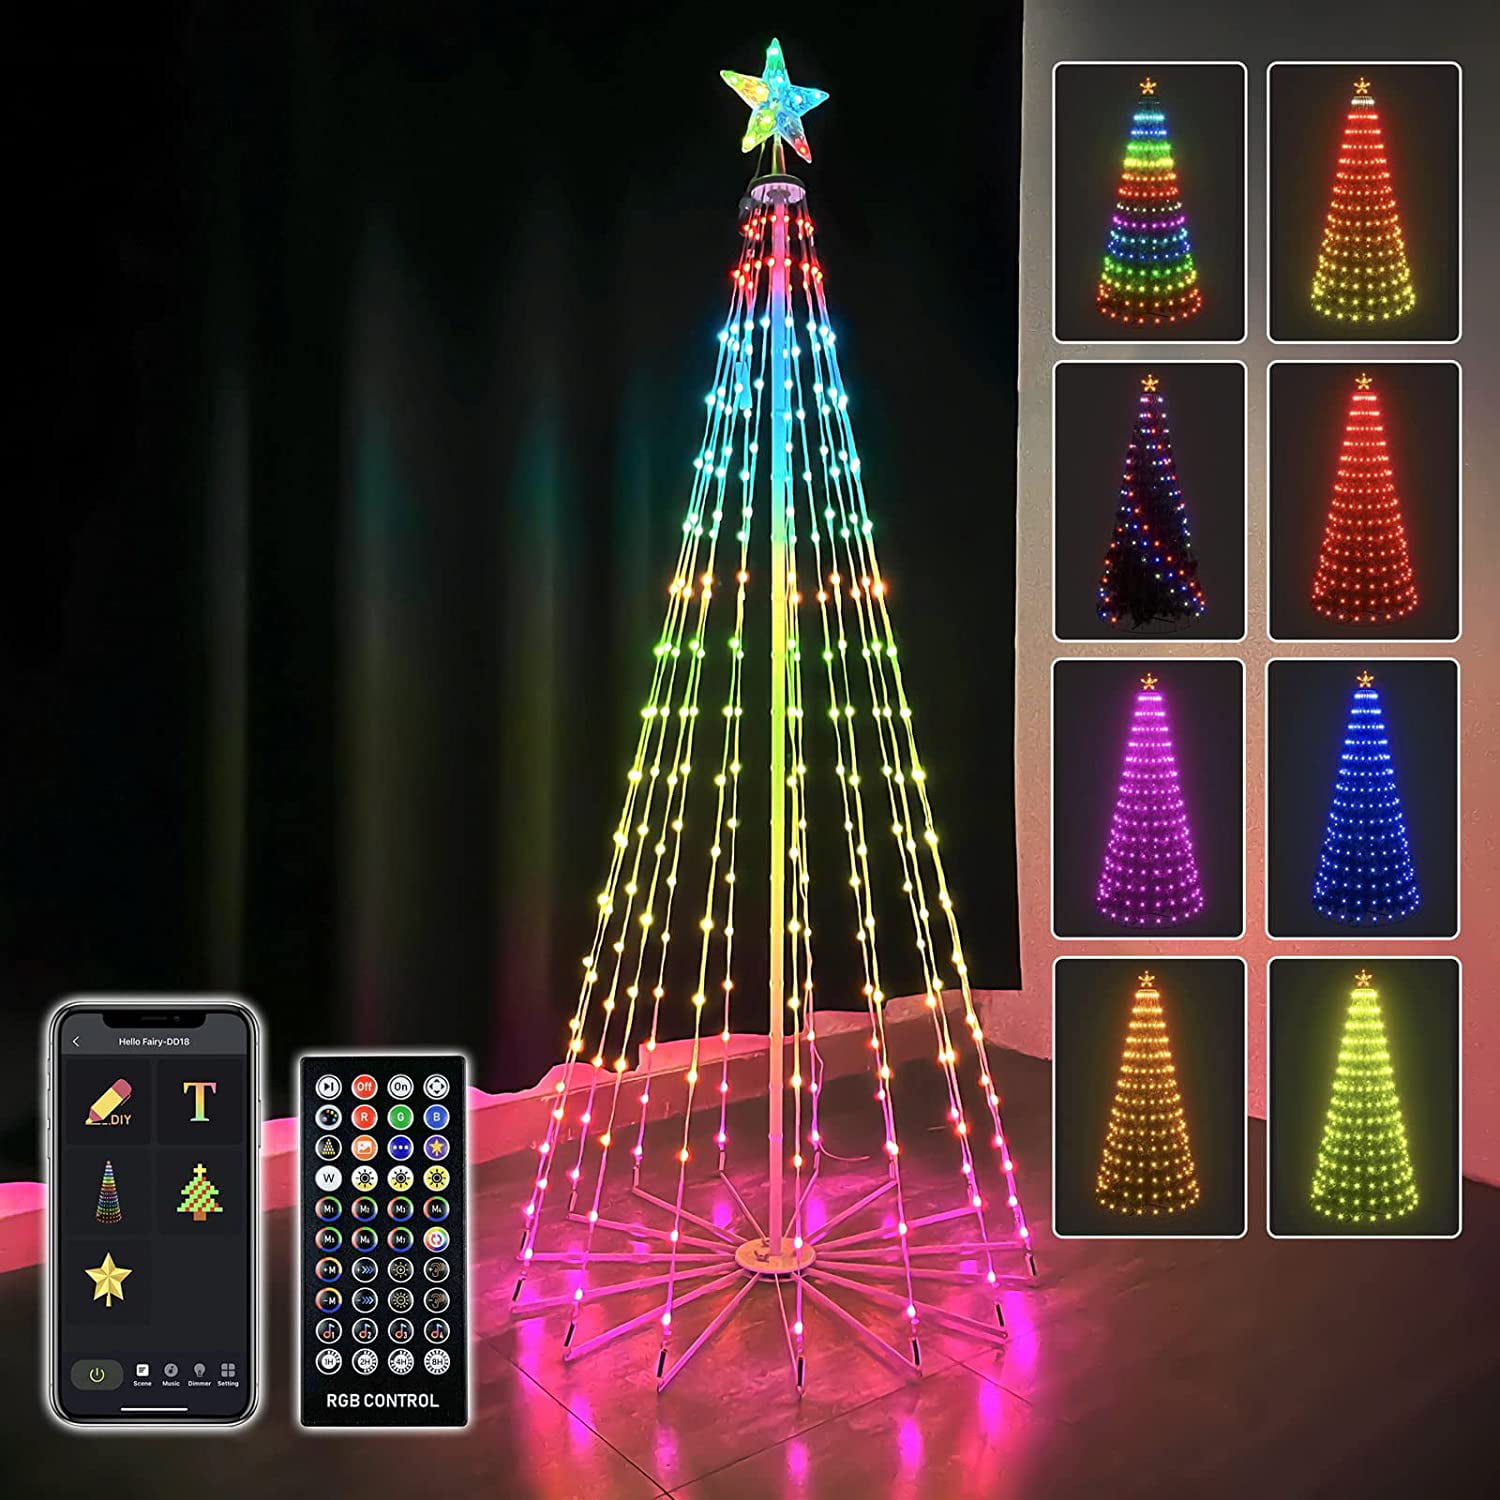 Xmas Magical Remote Control Retractable Christmas Tree🎄- Buy One, Gift –  Sterra Brand